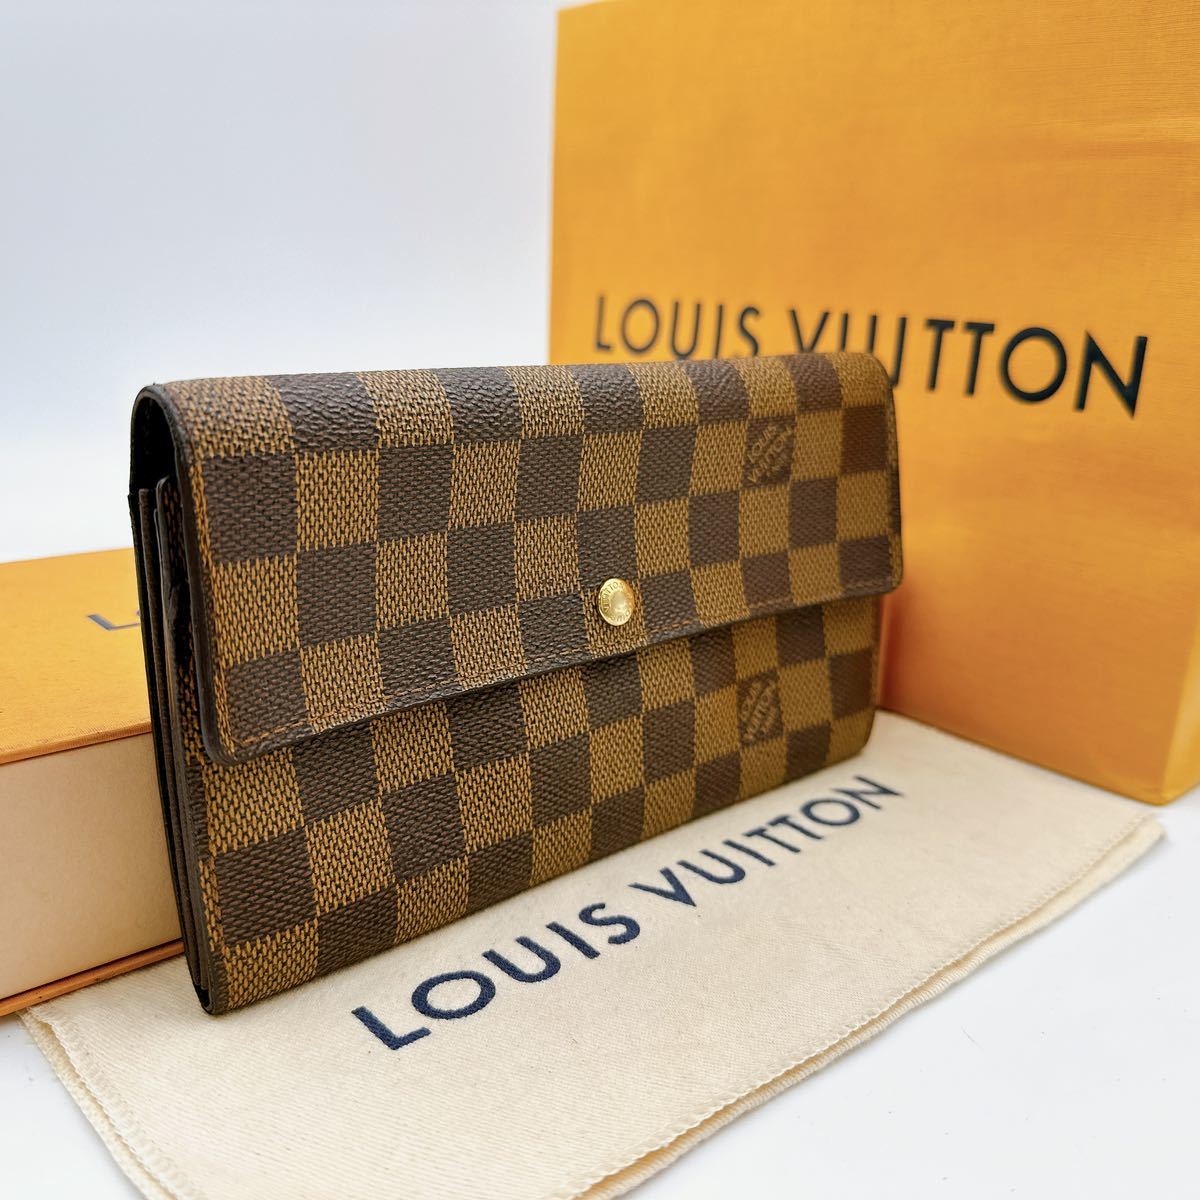 A2337【美品】LOUIS VUITTON ルイヴィトン ダミエ ポシェット ポルト